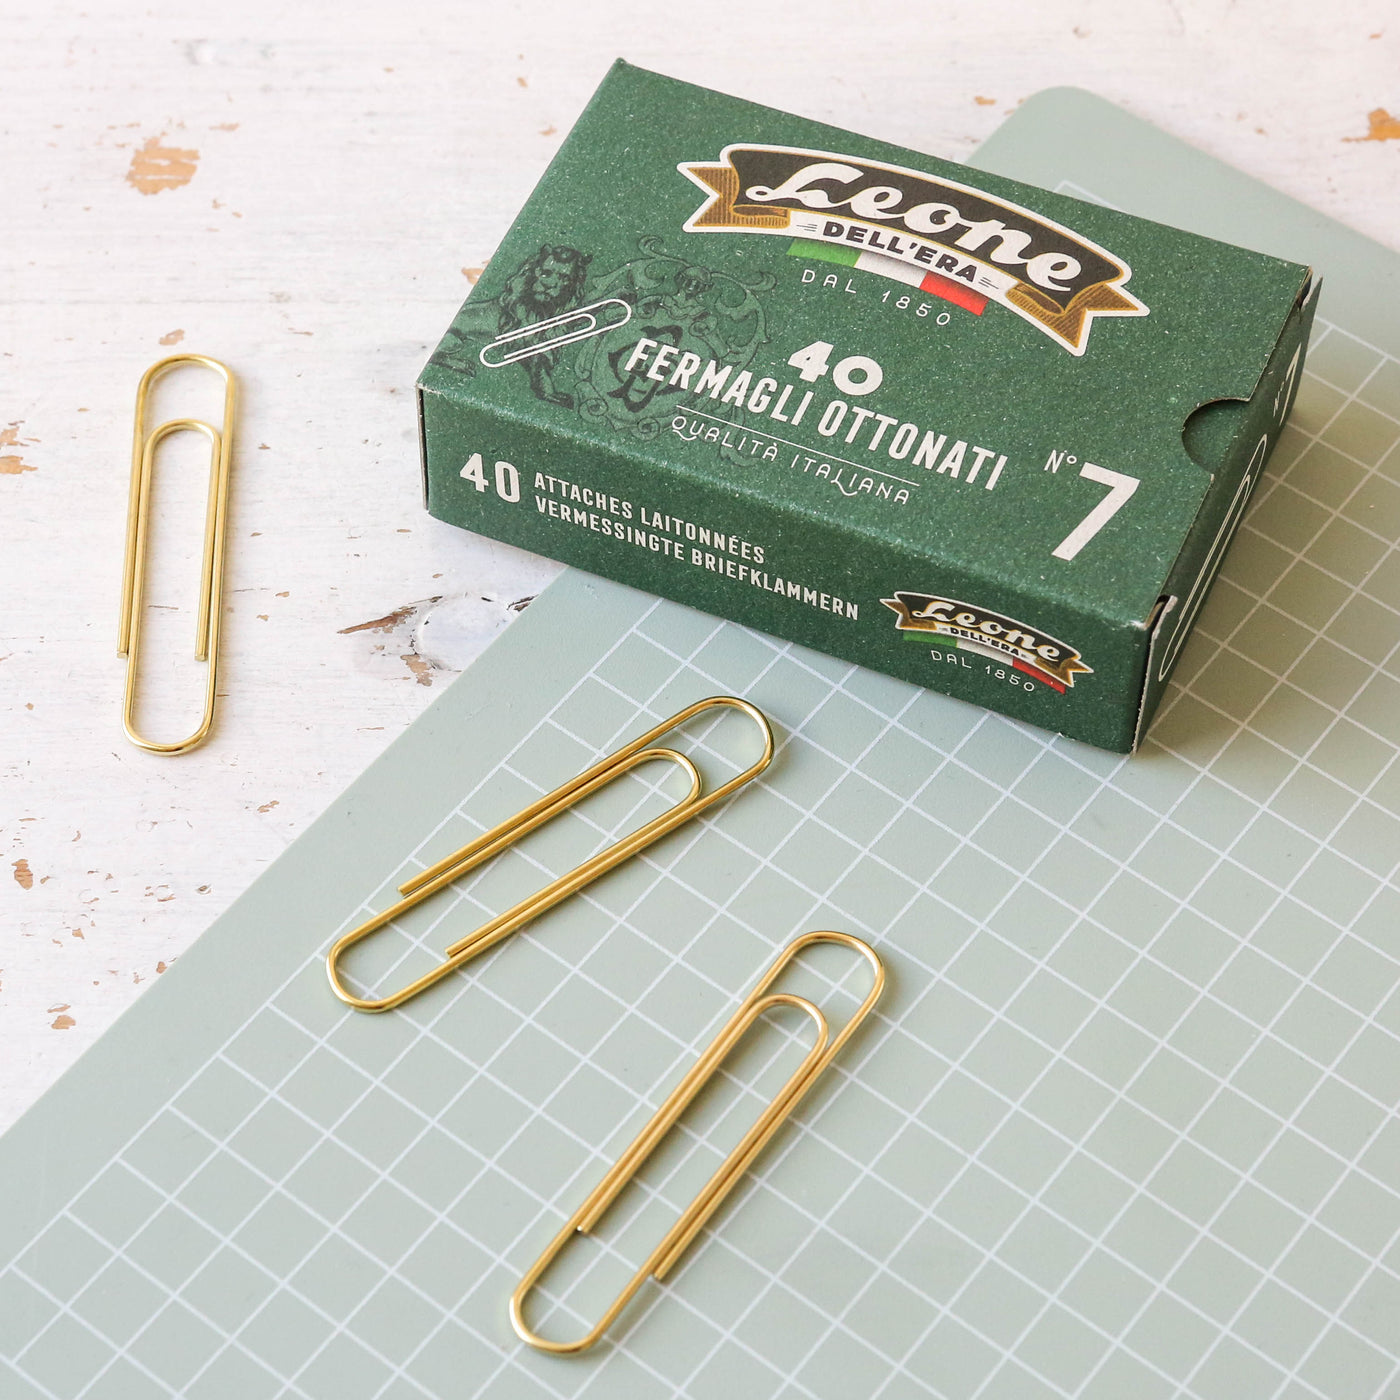 Giant Brass Paperclips by Leone Dell'Era